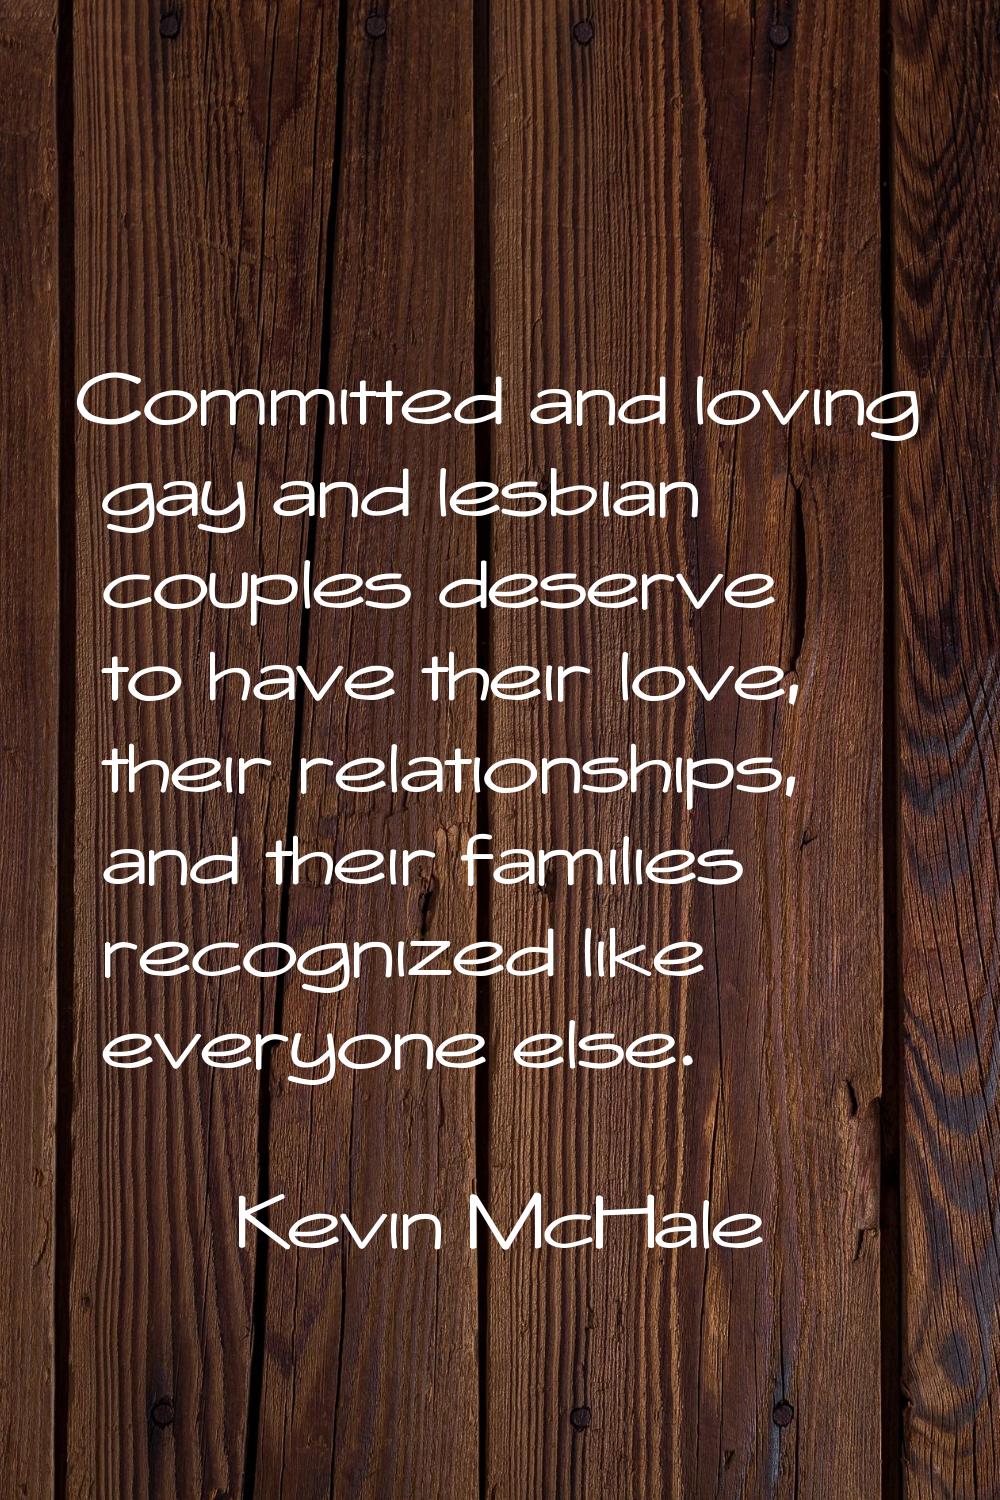 Committed and loving gay and lesbian couples deserve to have their love, their relationships, and t